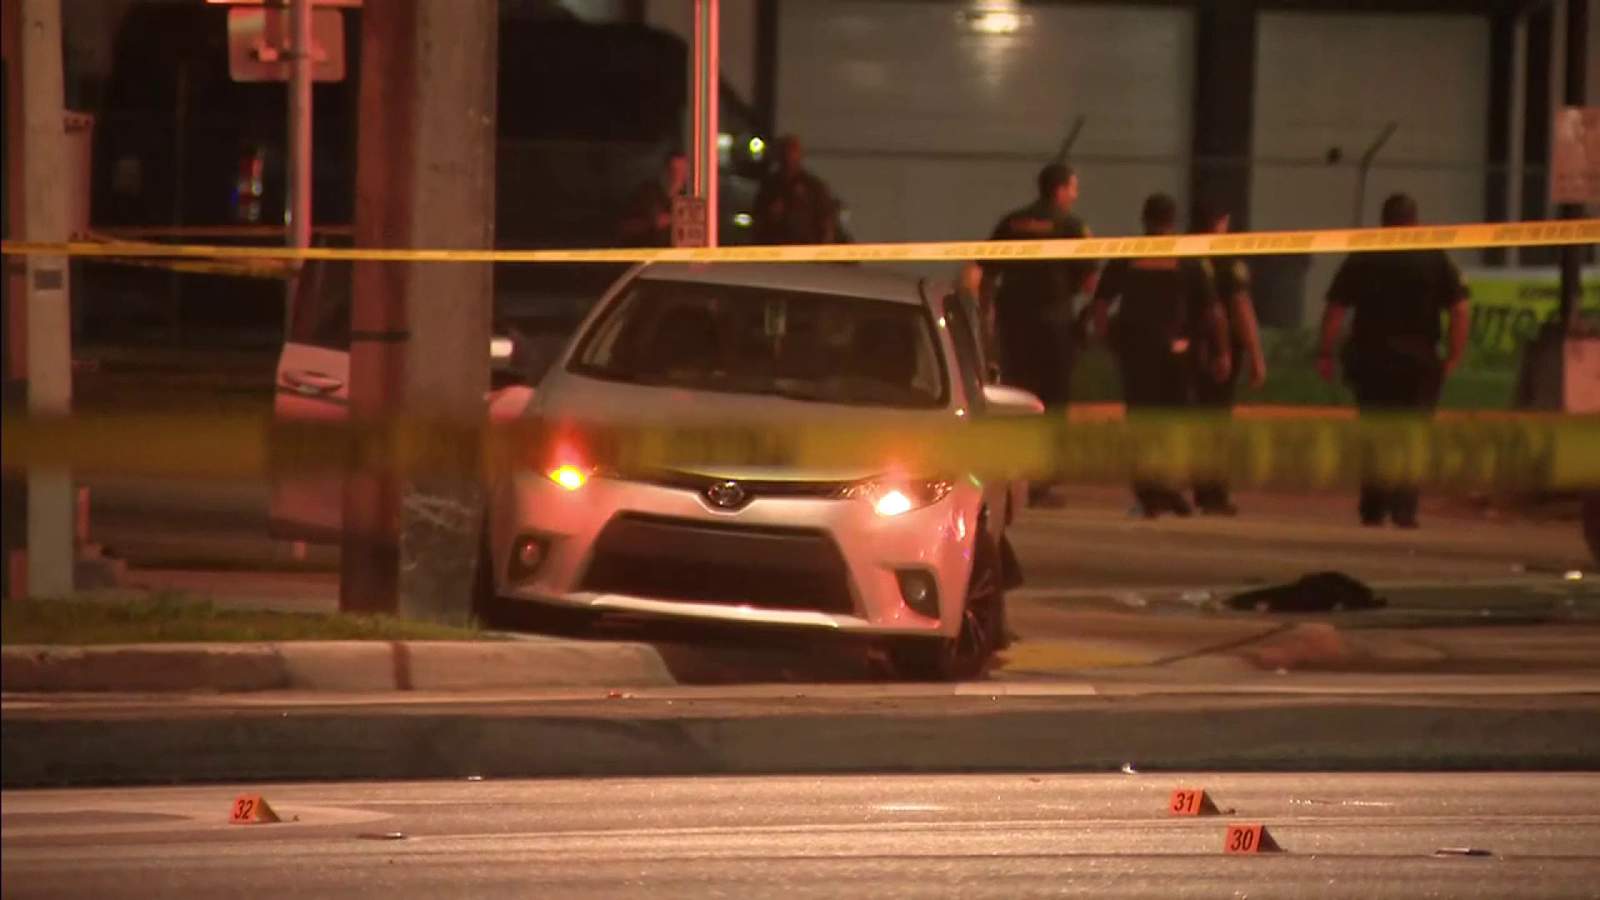 Early morning shooting in West Park injures 3, according to BSO